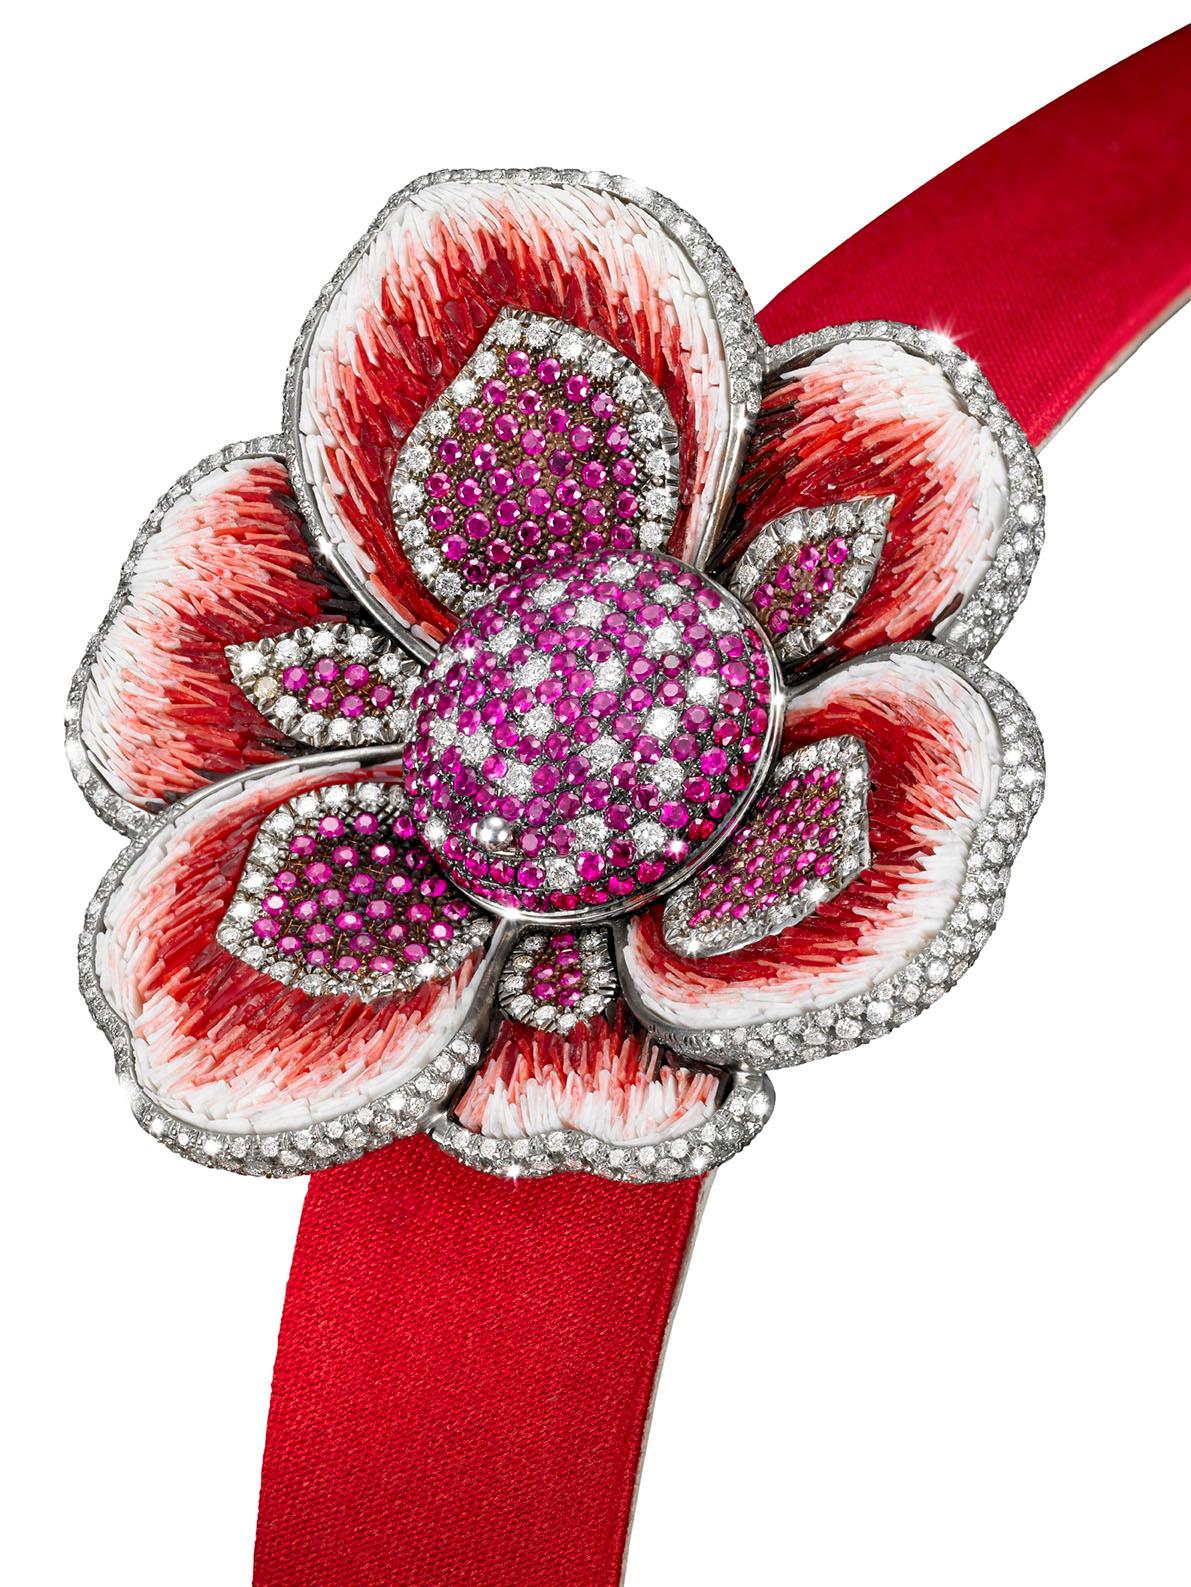 Contemporary Watch Gold White Diamonds Ruby Satin Strap Handdecorated with Micromosaic For Sale